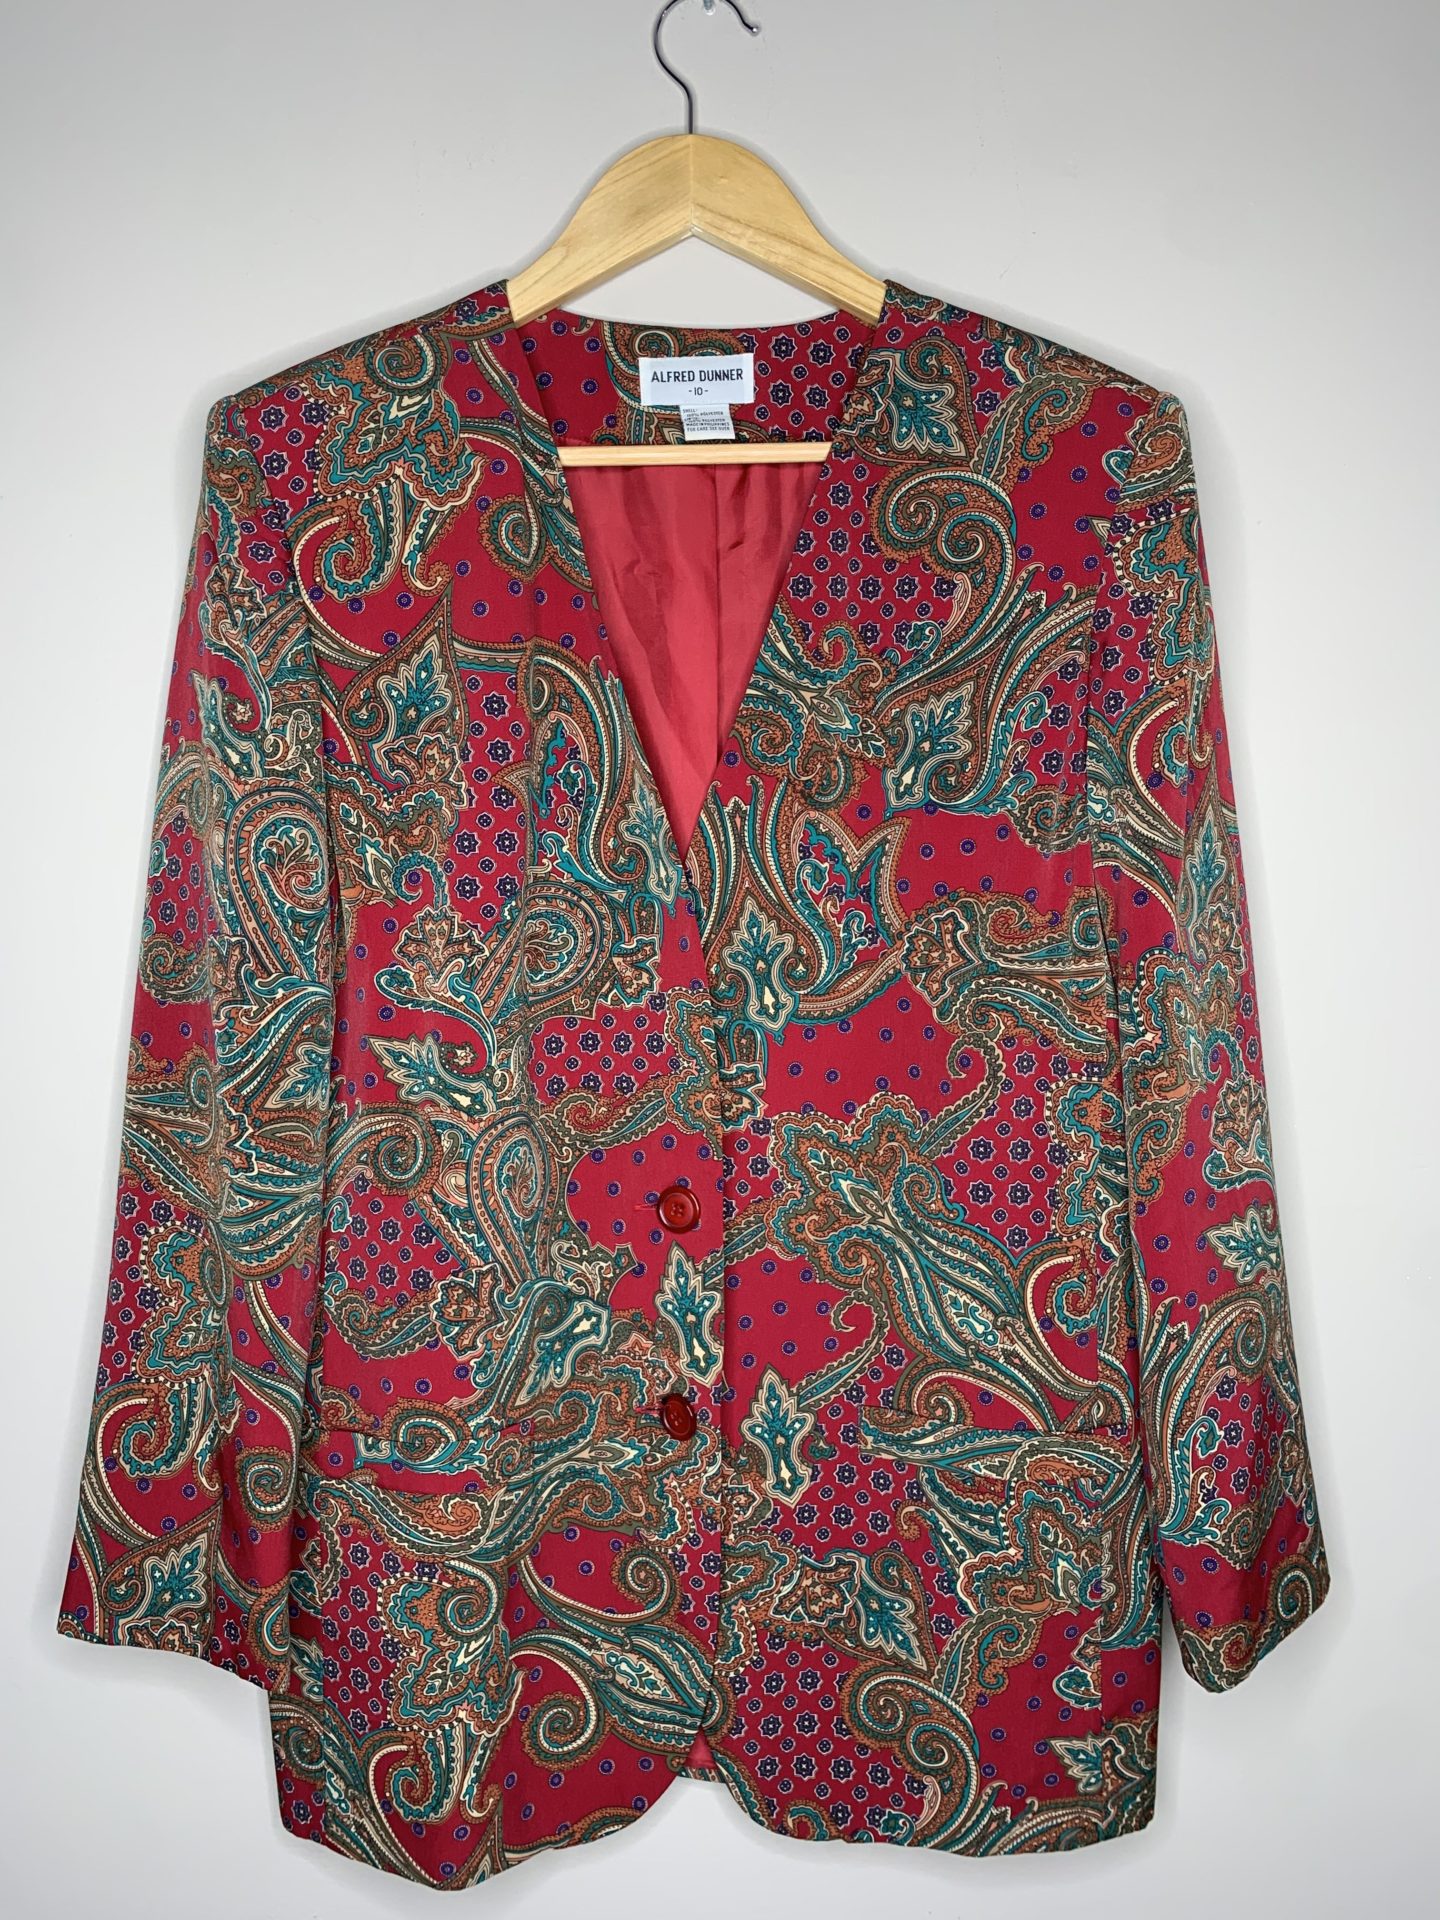 Alfred Dunner Paisley Blazer (M) - MPC Vintage